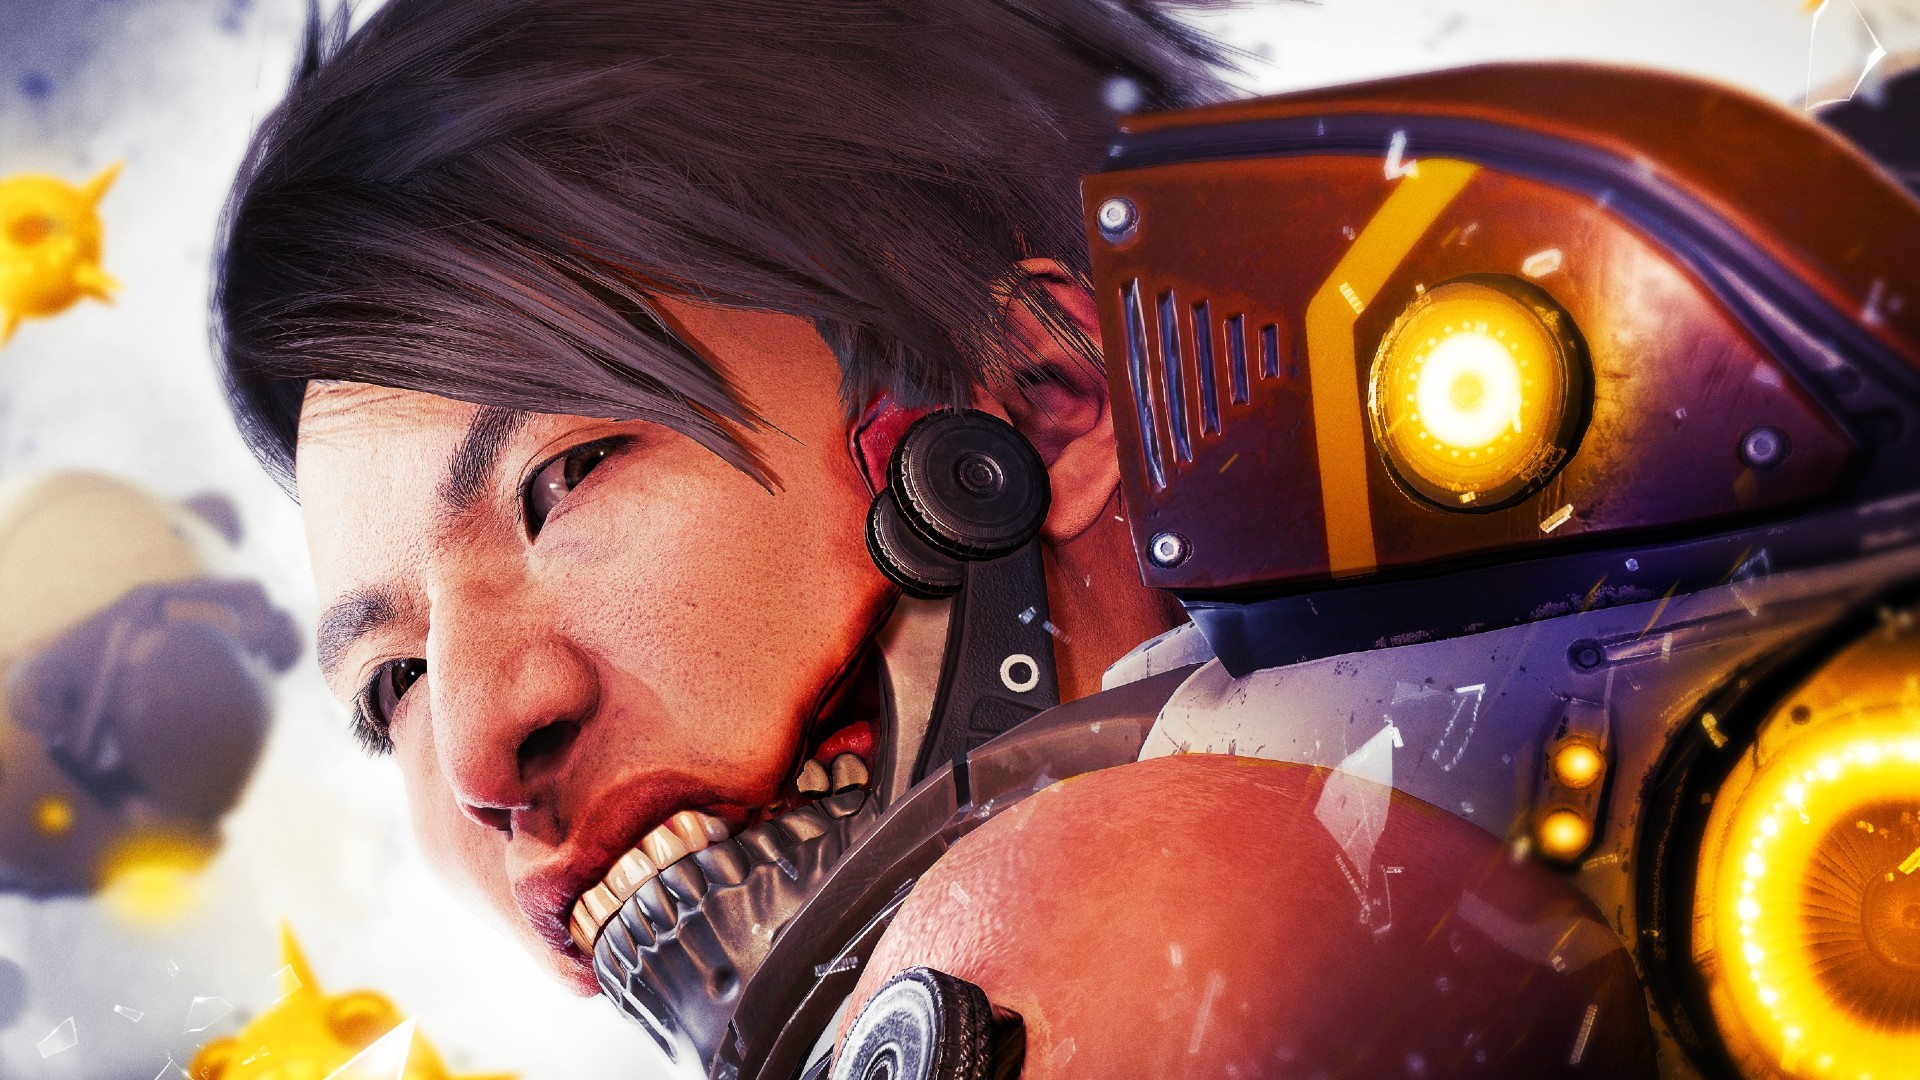 Cliff Bleszinski teases LawBreakers news, after a text from his lawyer